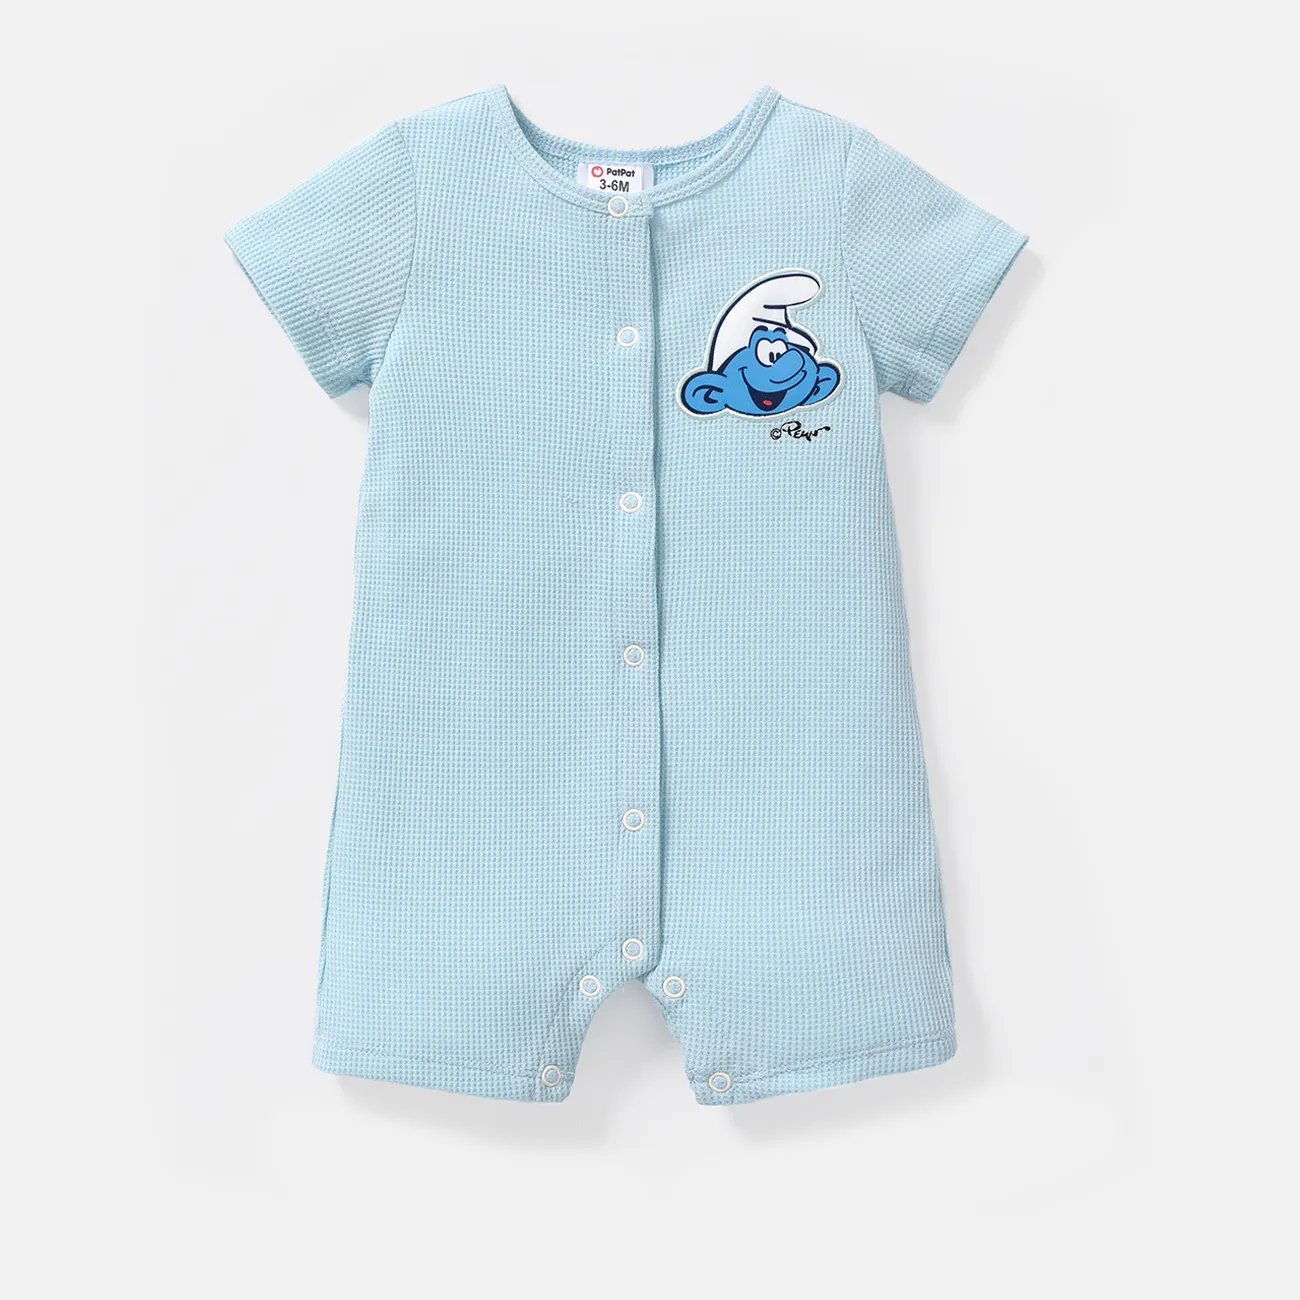 The Smurfs Baby Boy/Girl Short-sleeve Solid Waffle or Allover Print Naia™ Romper Light Blue big image 1